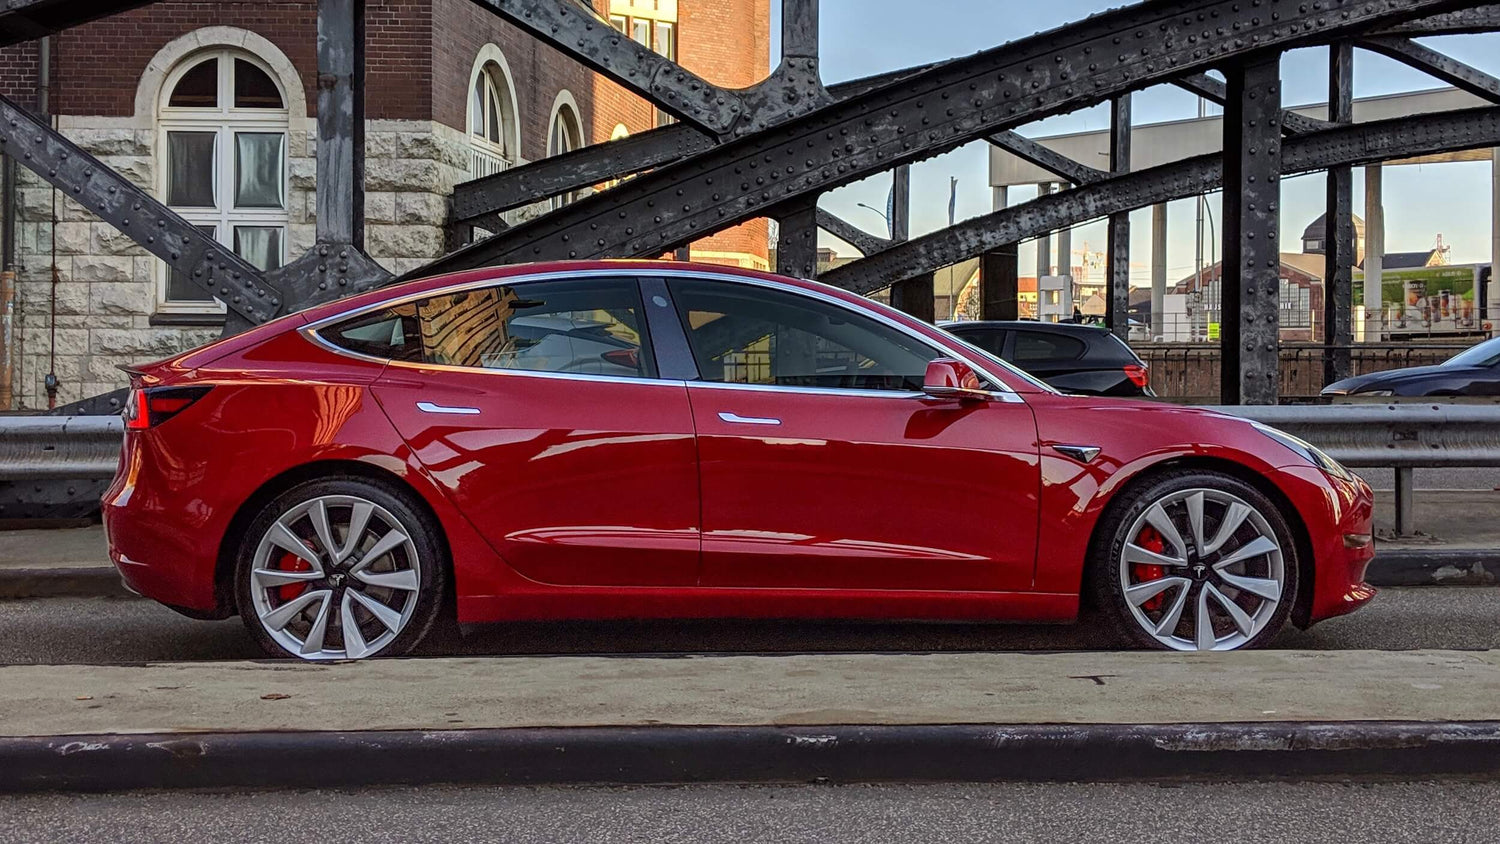 Tesla Model 3 Is Leading in Luxembourg With More Than 2X of The 2nd Place